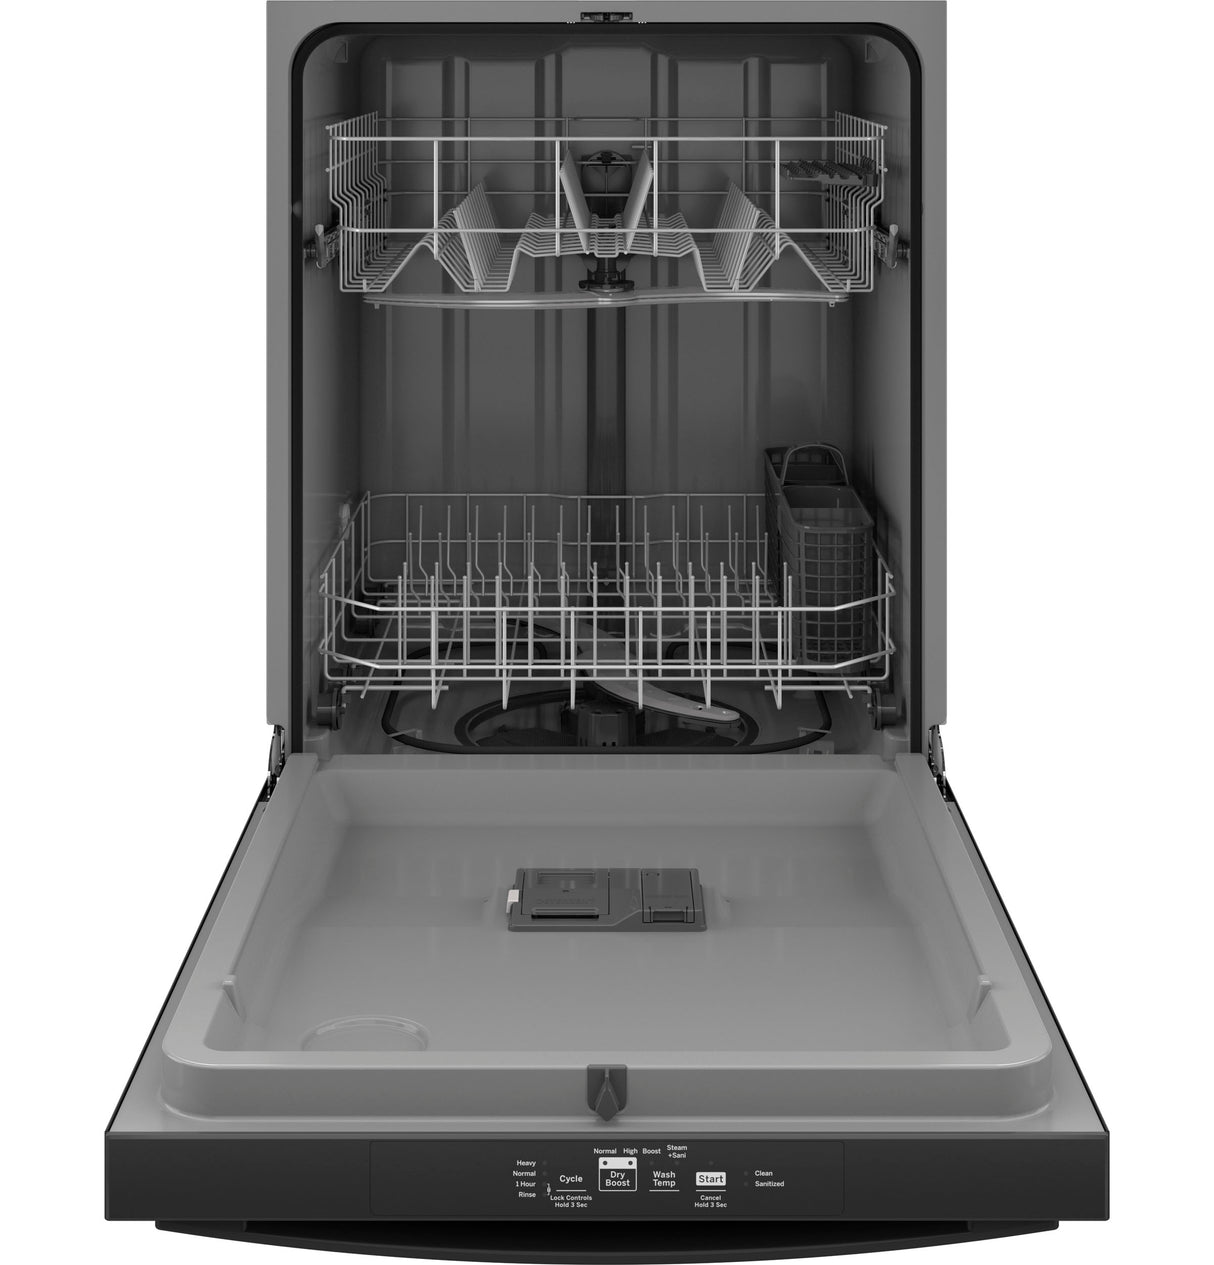 GE(R) ENERGY STAR(R) Top Control with Plastic Interior Dishwasher with Sanitize Cycle & Dry Boost - (GDT535PGRBB)